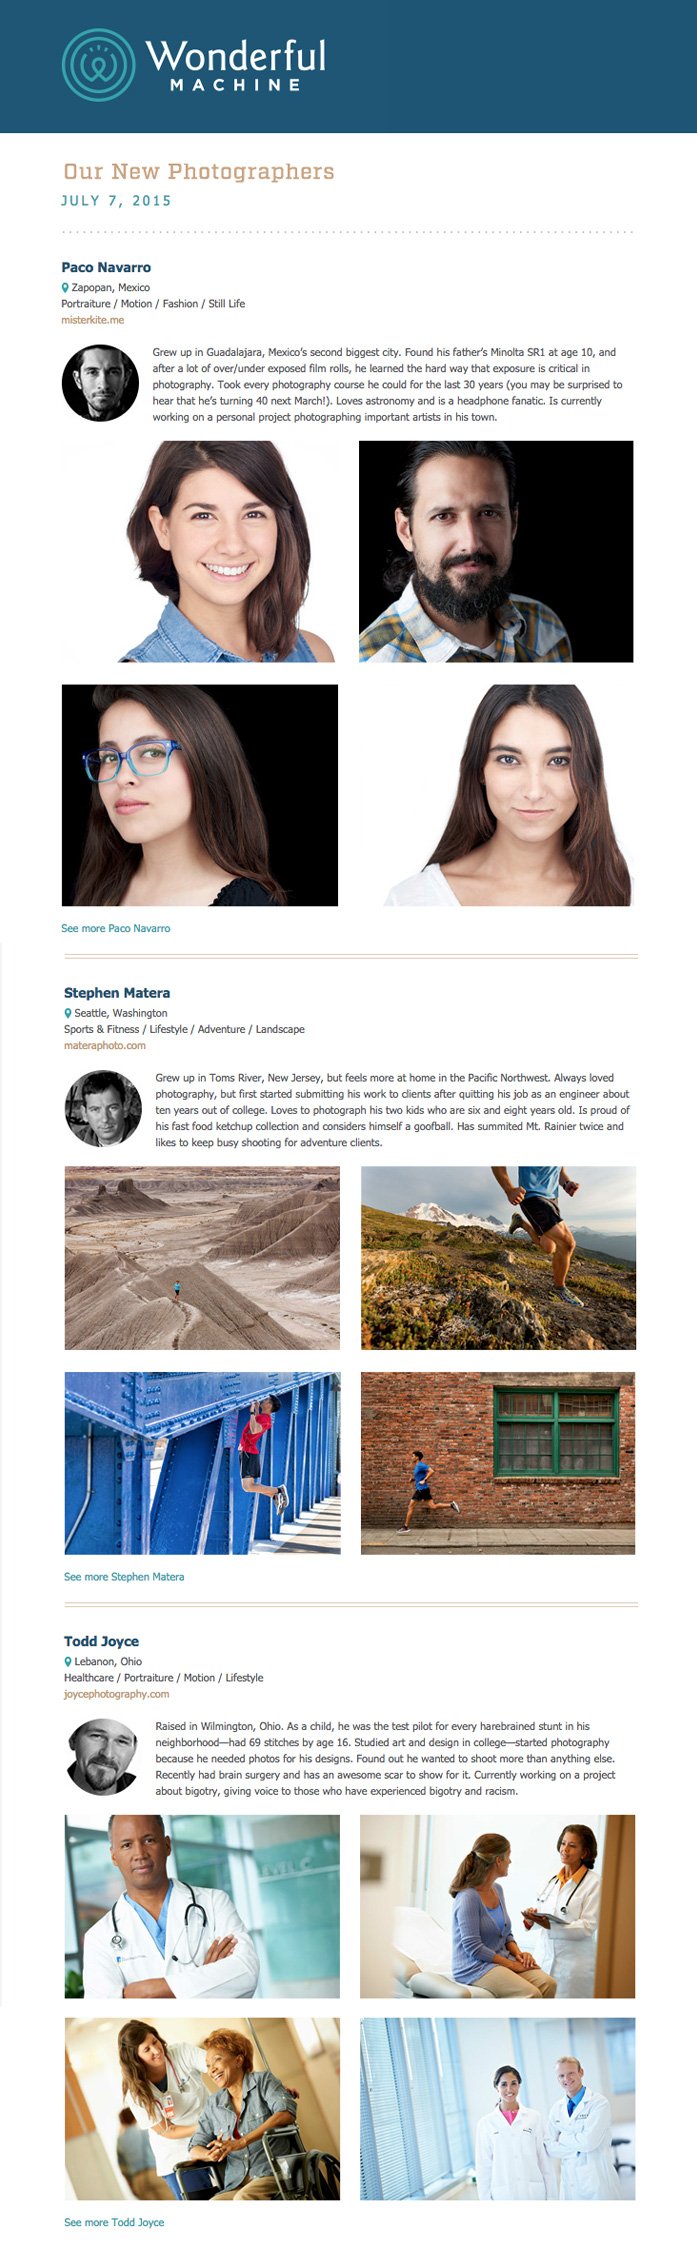 emailer welcoming our new member photographers for July 7 2015: Paco Navarro, Stephen Matera, Todd Joyce